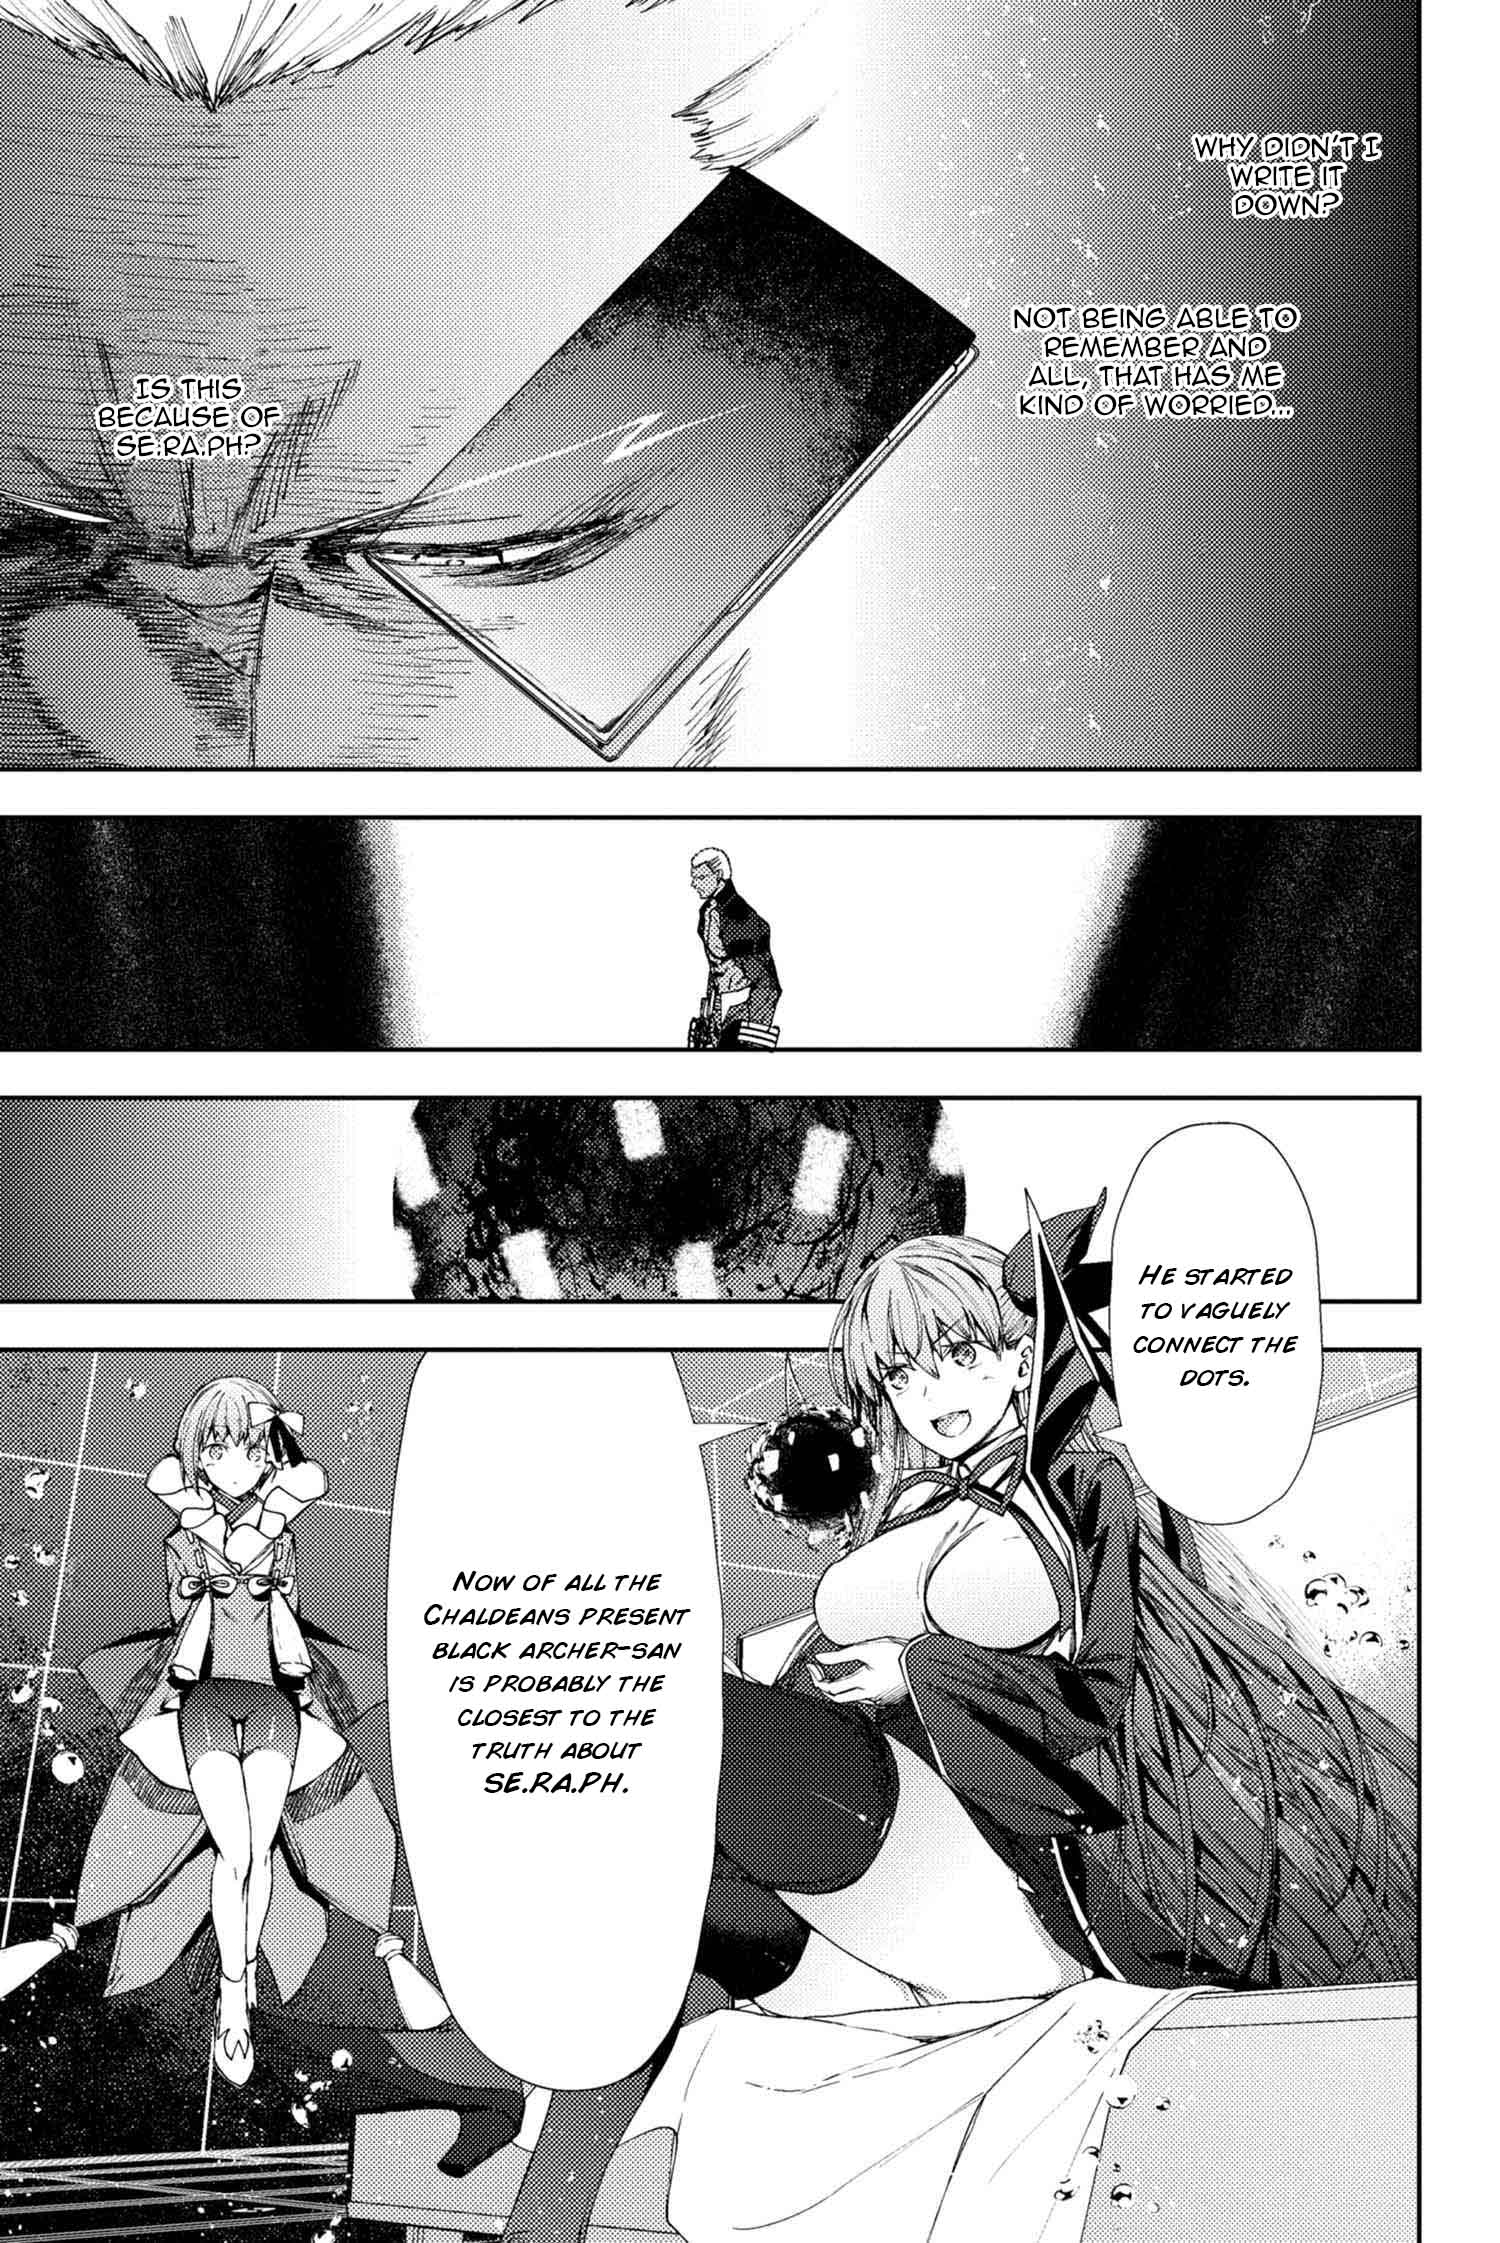 Fate/grand Order -Epic Of Remnant- Deep Sea Cyber-Paradise Se.ra.ph - 11.2 page 8